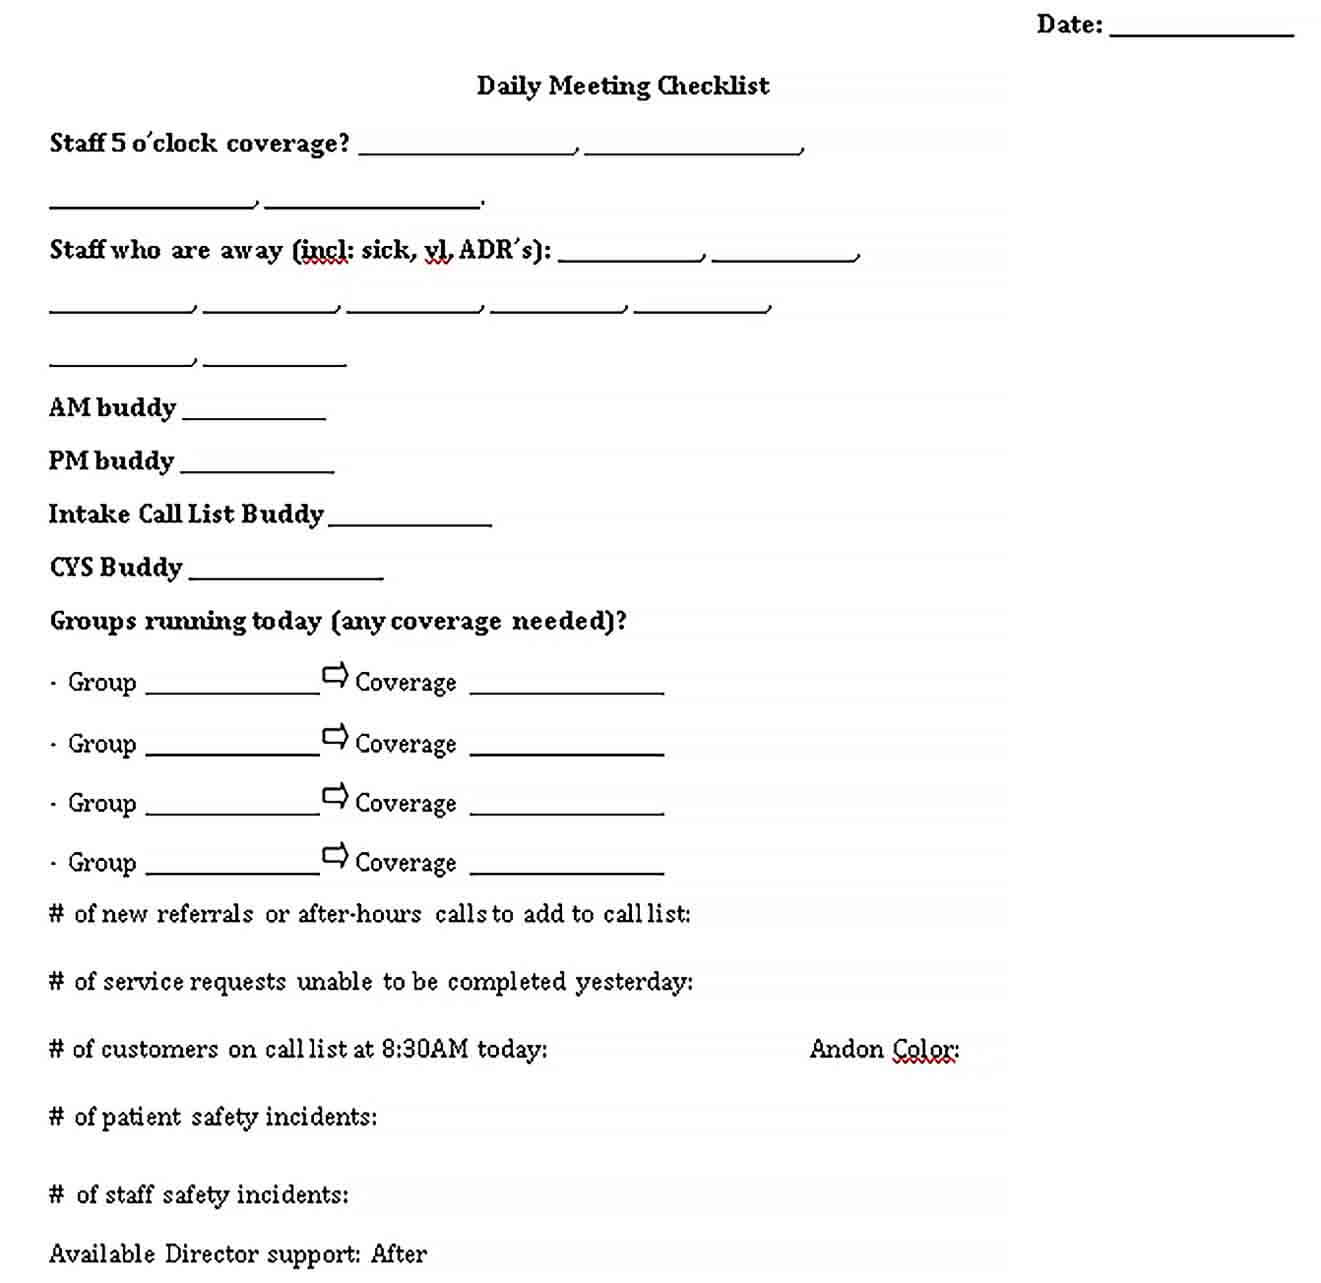 Sample Daily Meeting Checklist Template